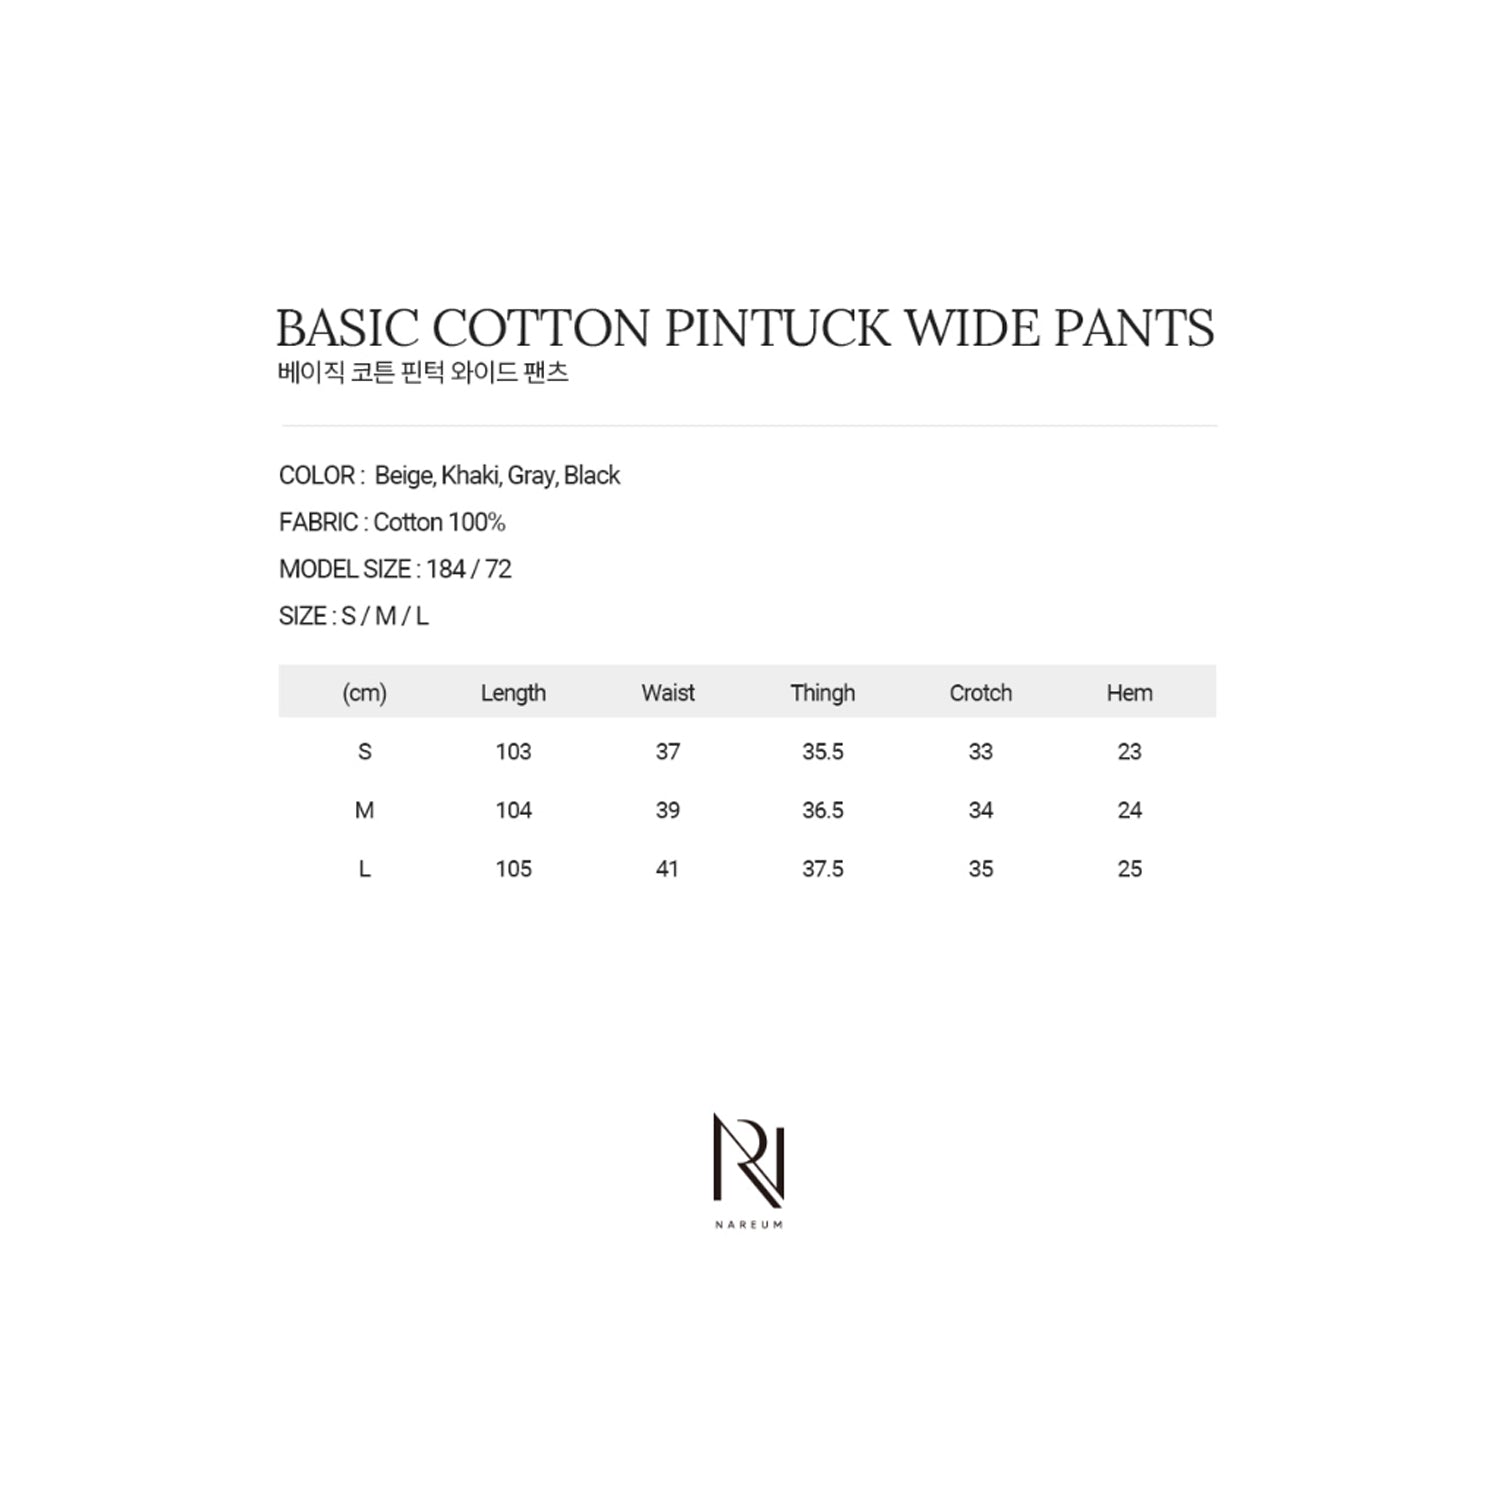 BASIC COTTON PINTUCK WIDE PANT'S